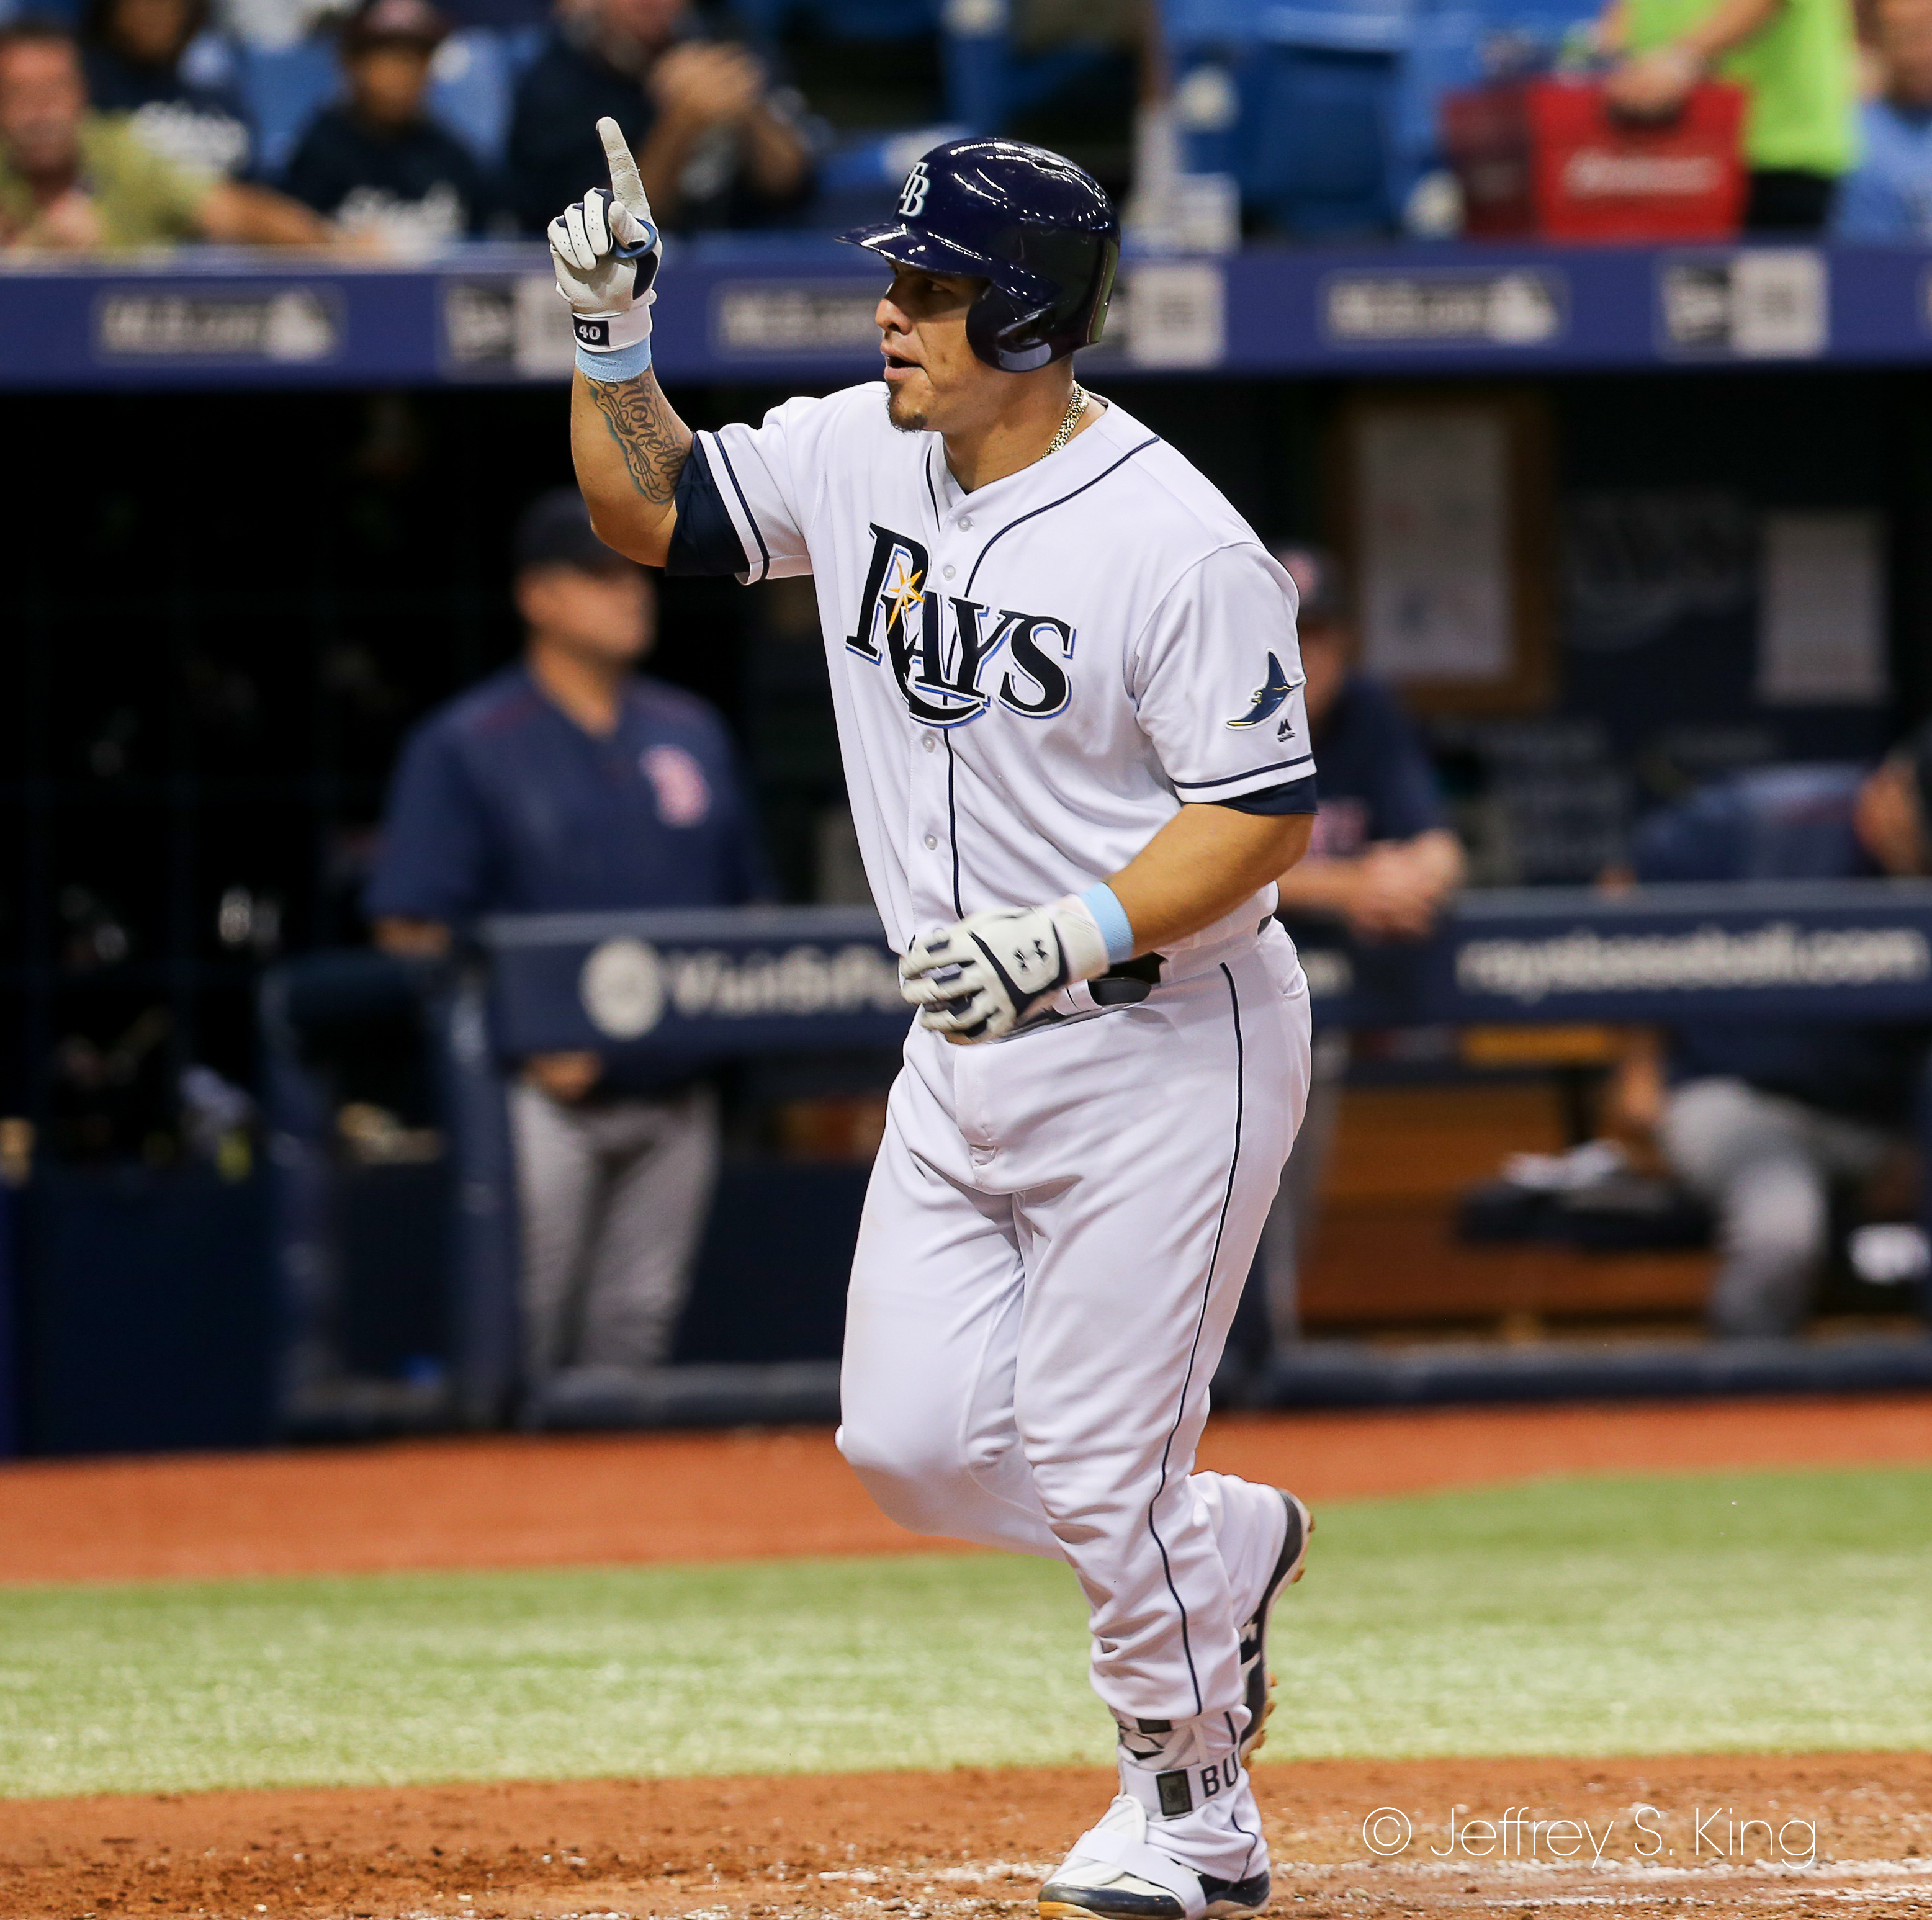 Ramos hit a two-run homer for the Rays./JEFFREY S. KING